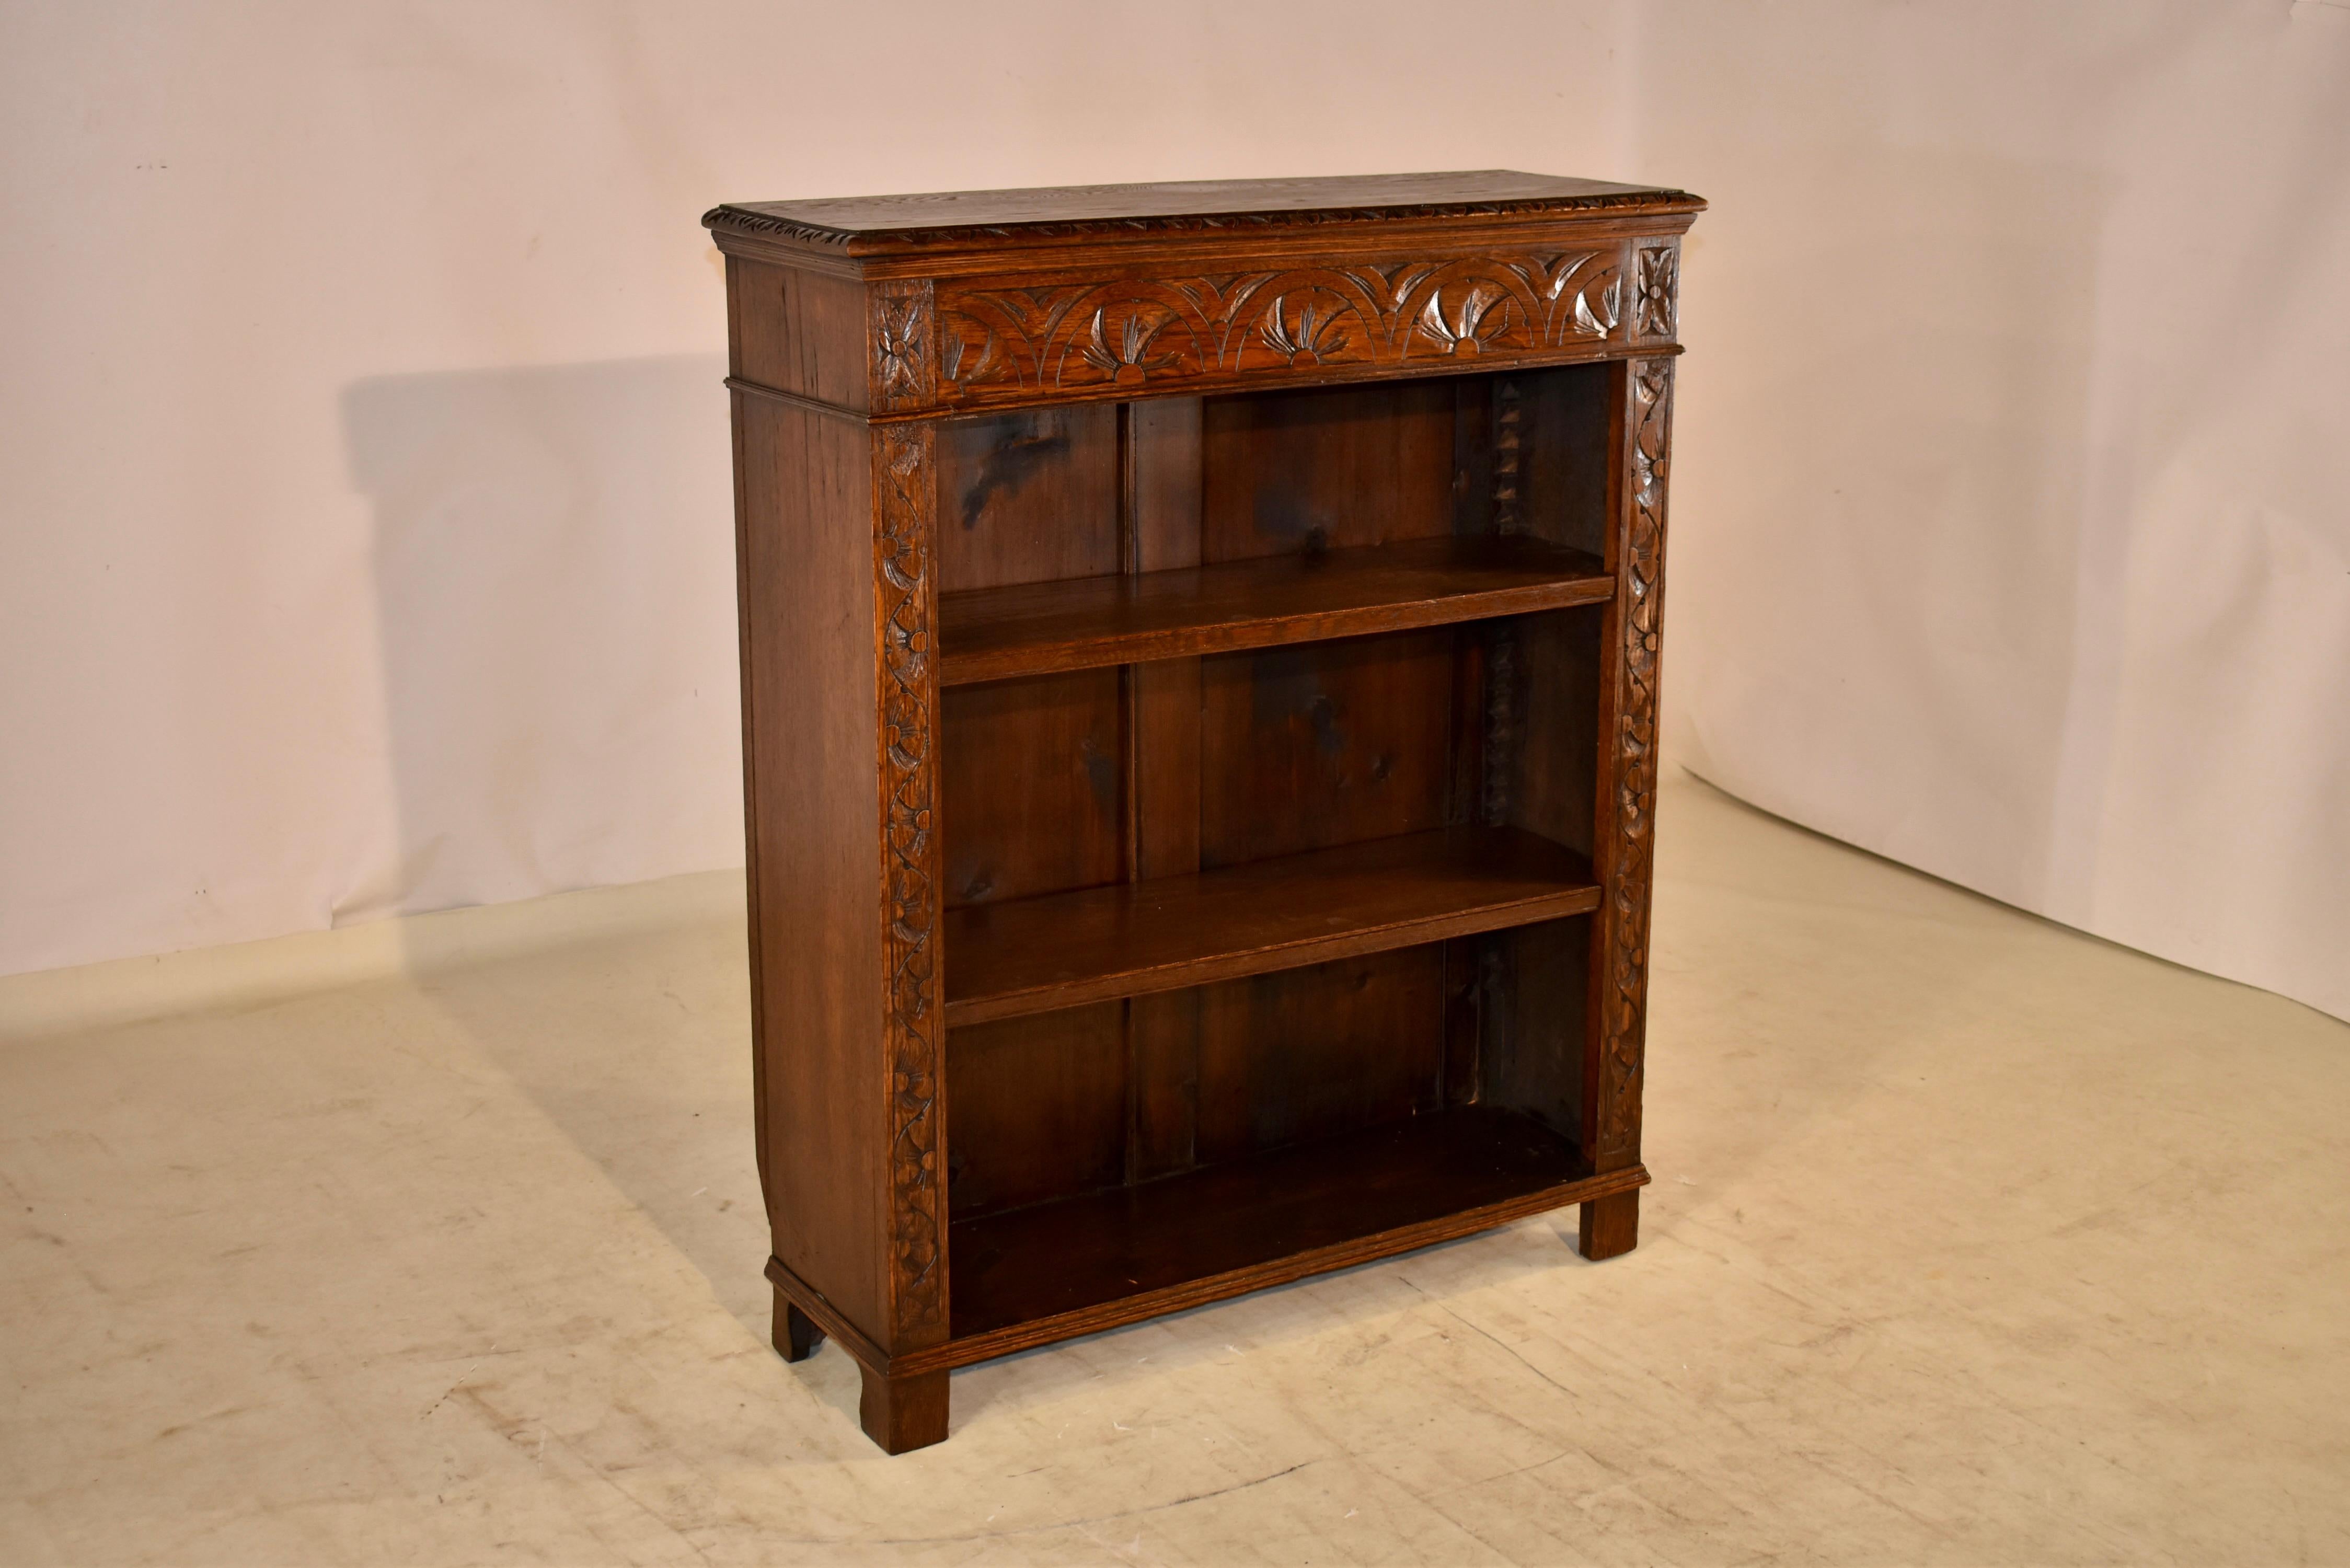 19th century hand carved oak bookcase from England. The top has a beveled and carved decorated edge following down to simple sides with molded detail, and a hand carved decorated case in the front. It has three shelves, two of which are adjustable.